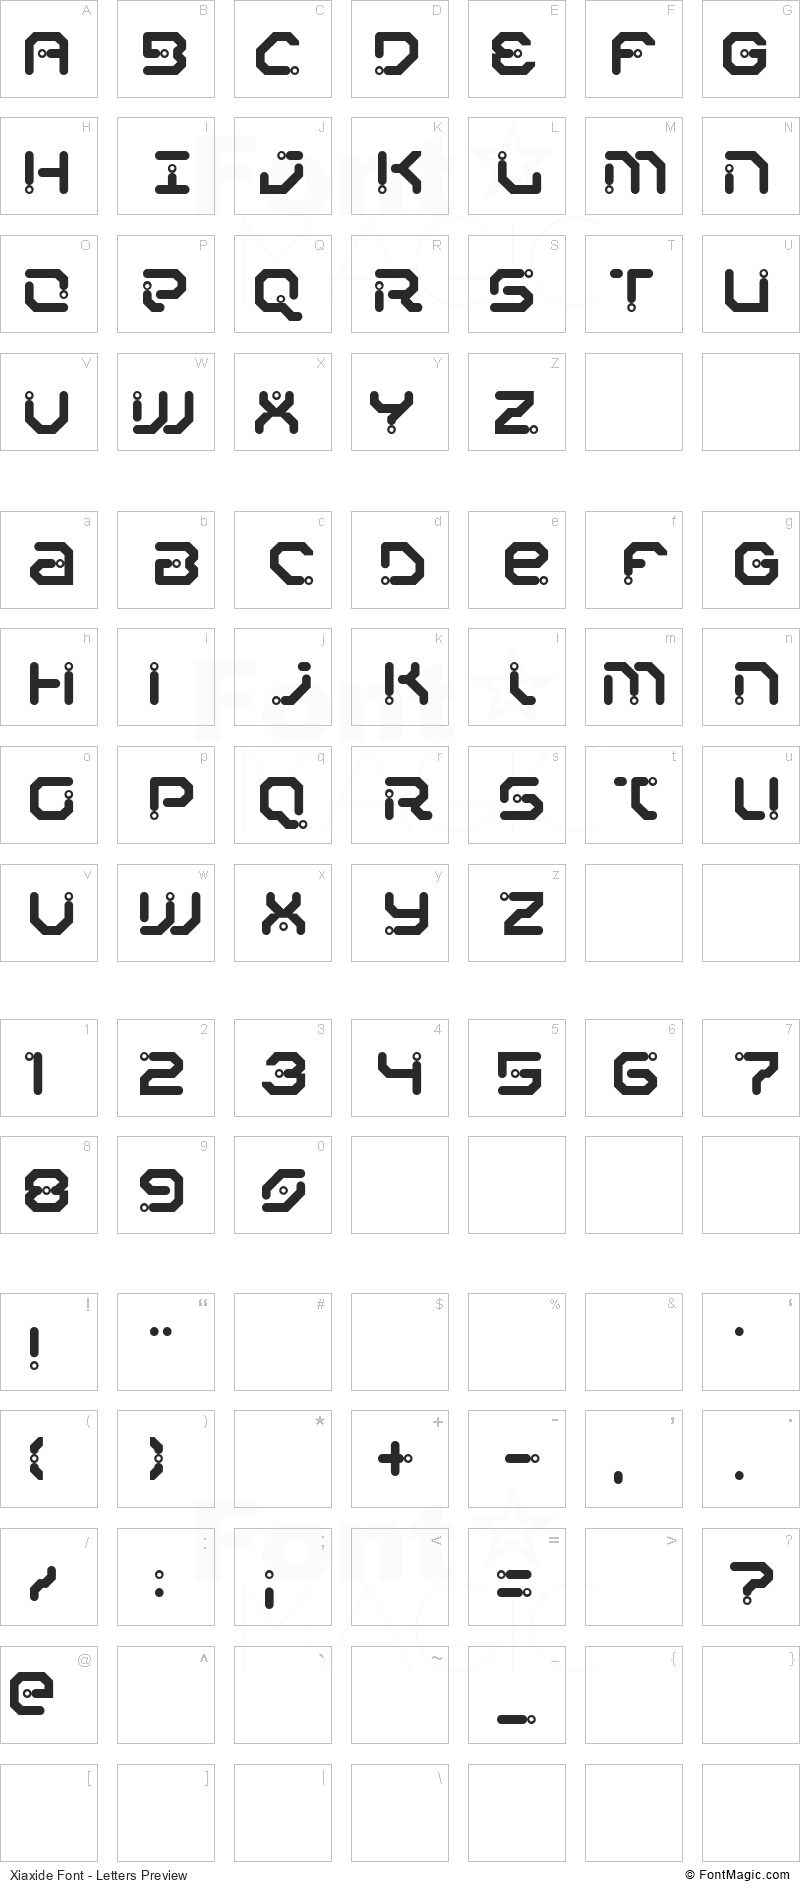 Xiaxide Font - All Latters Preview Chart